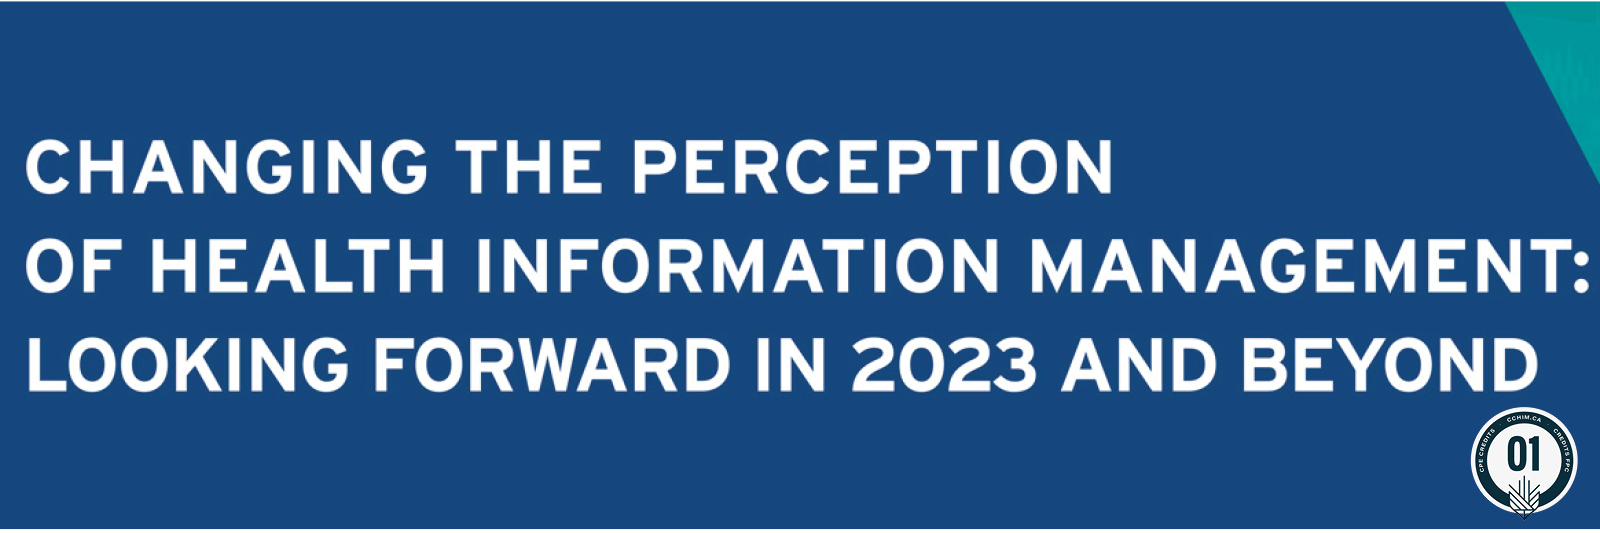 Changing the perception of health information management banner